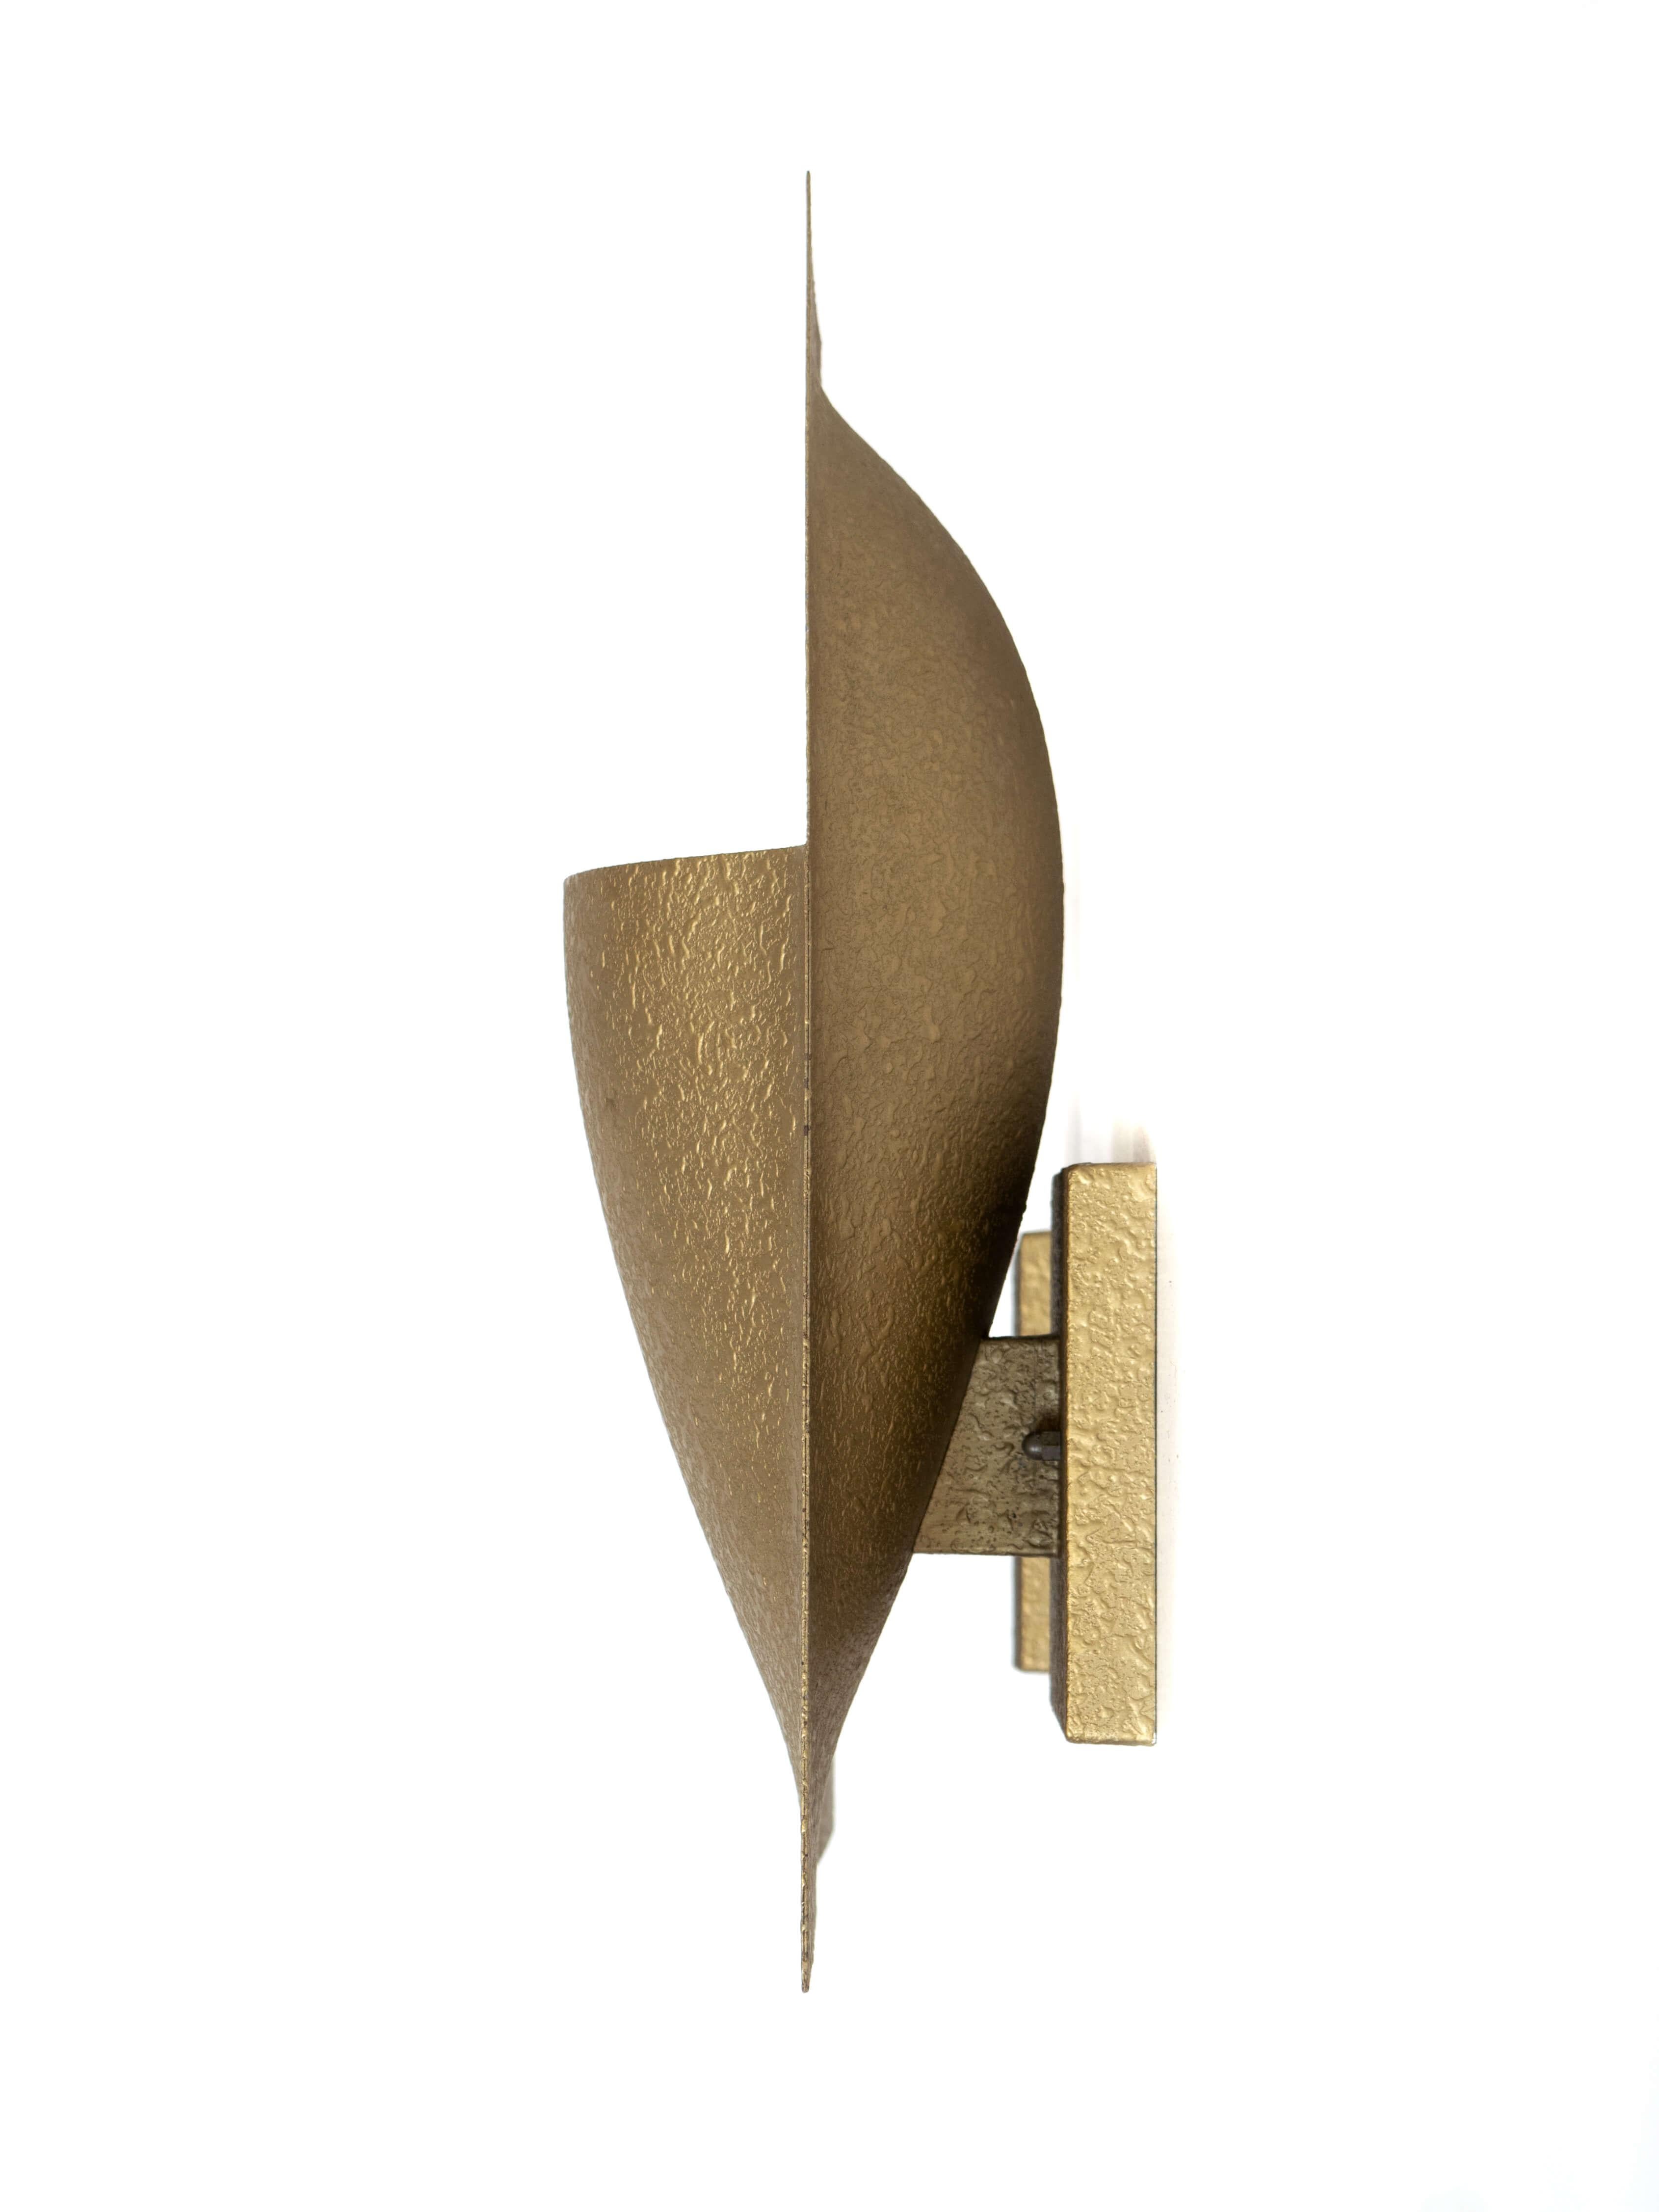 Amazing set of two Bertrand Balas 'Balance' wall lights for RAAK with Model C-1550 from the Netherlands, 1960s. These scones have a gold-colored leaf shape with a granulated structure. You can hang them in both directions; with the opening up or